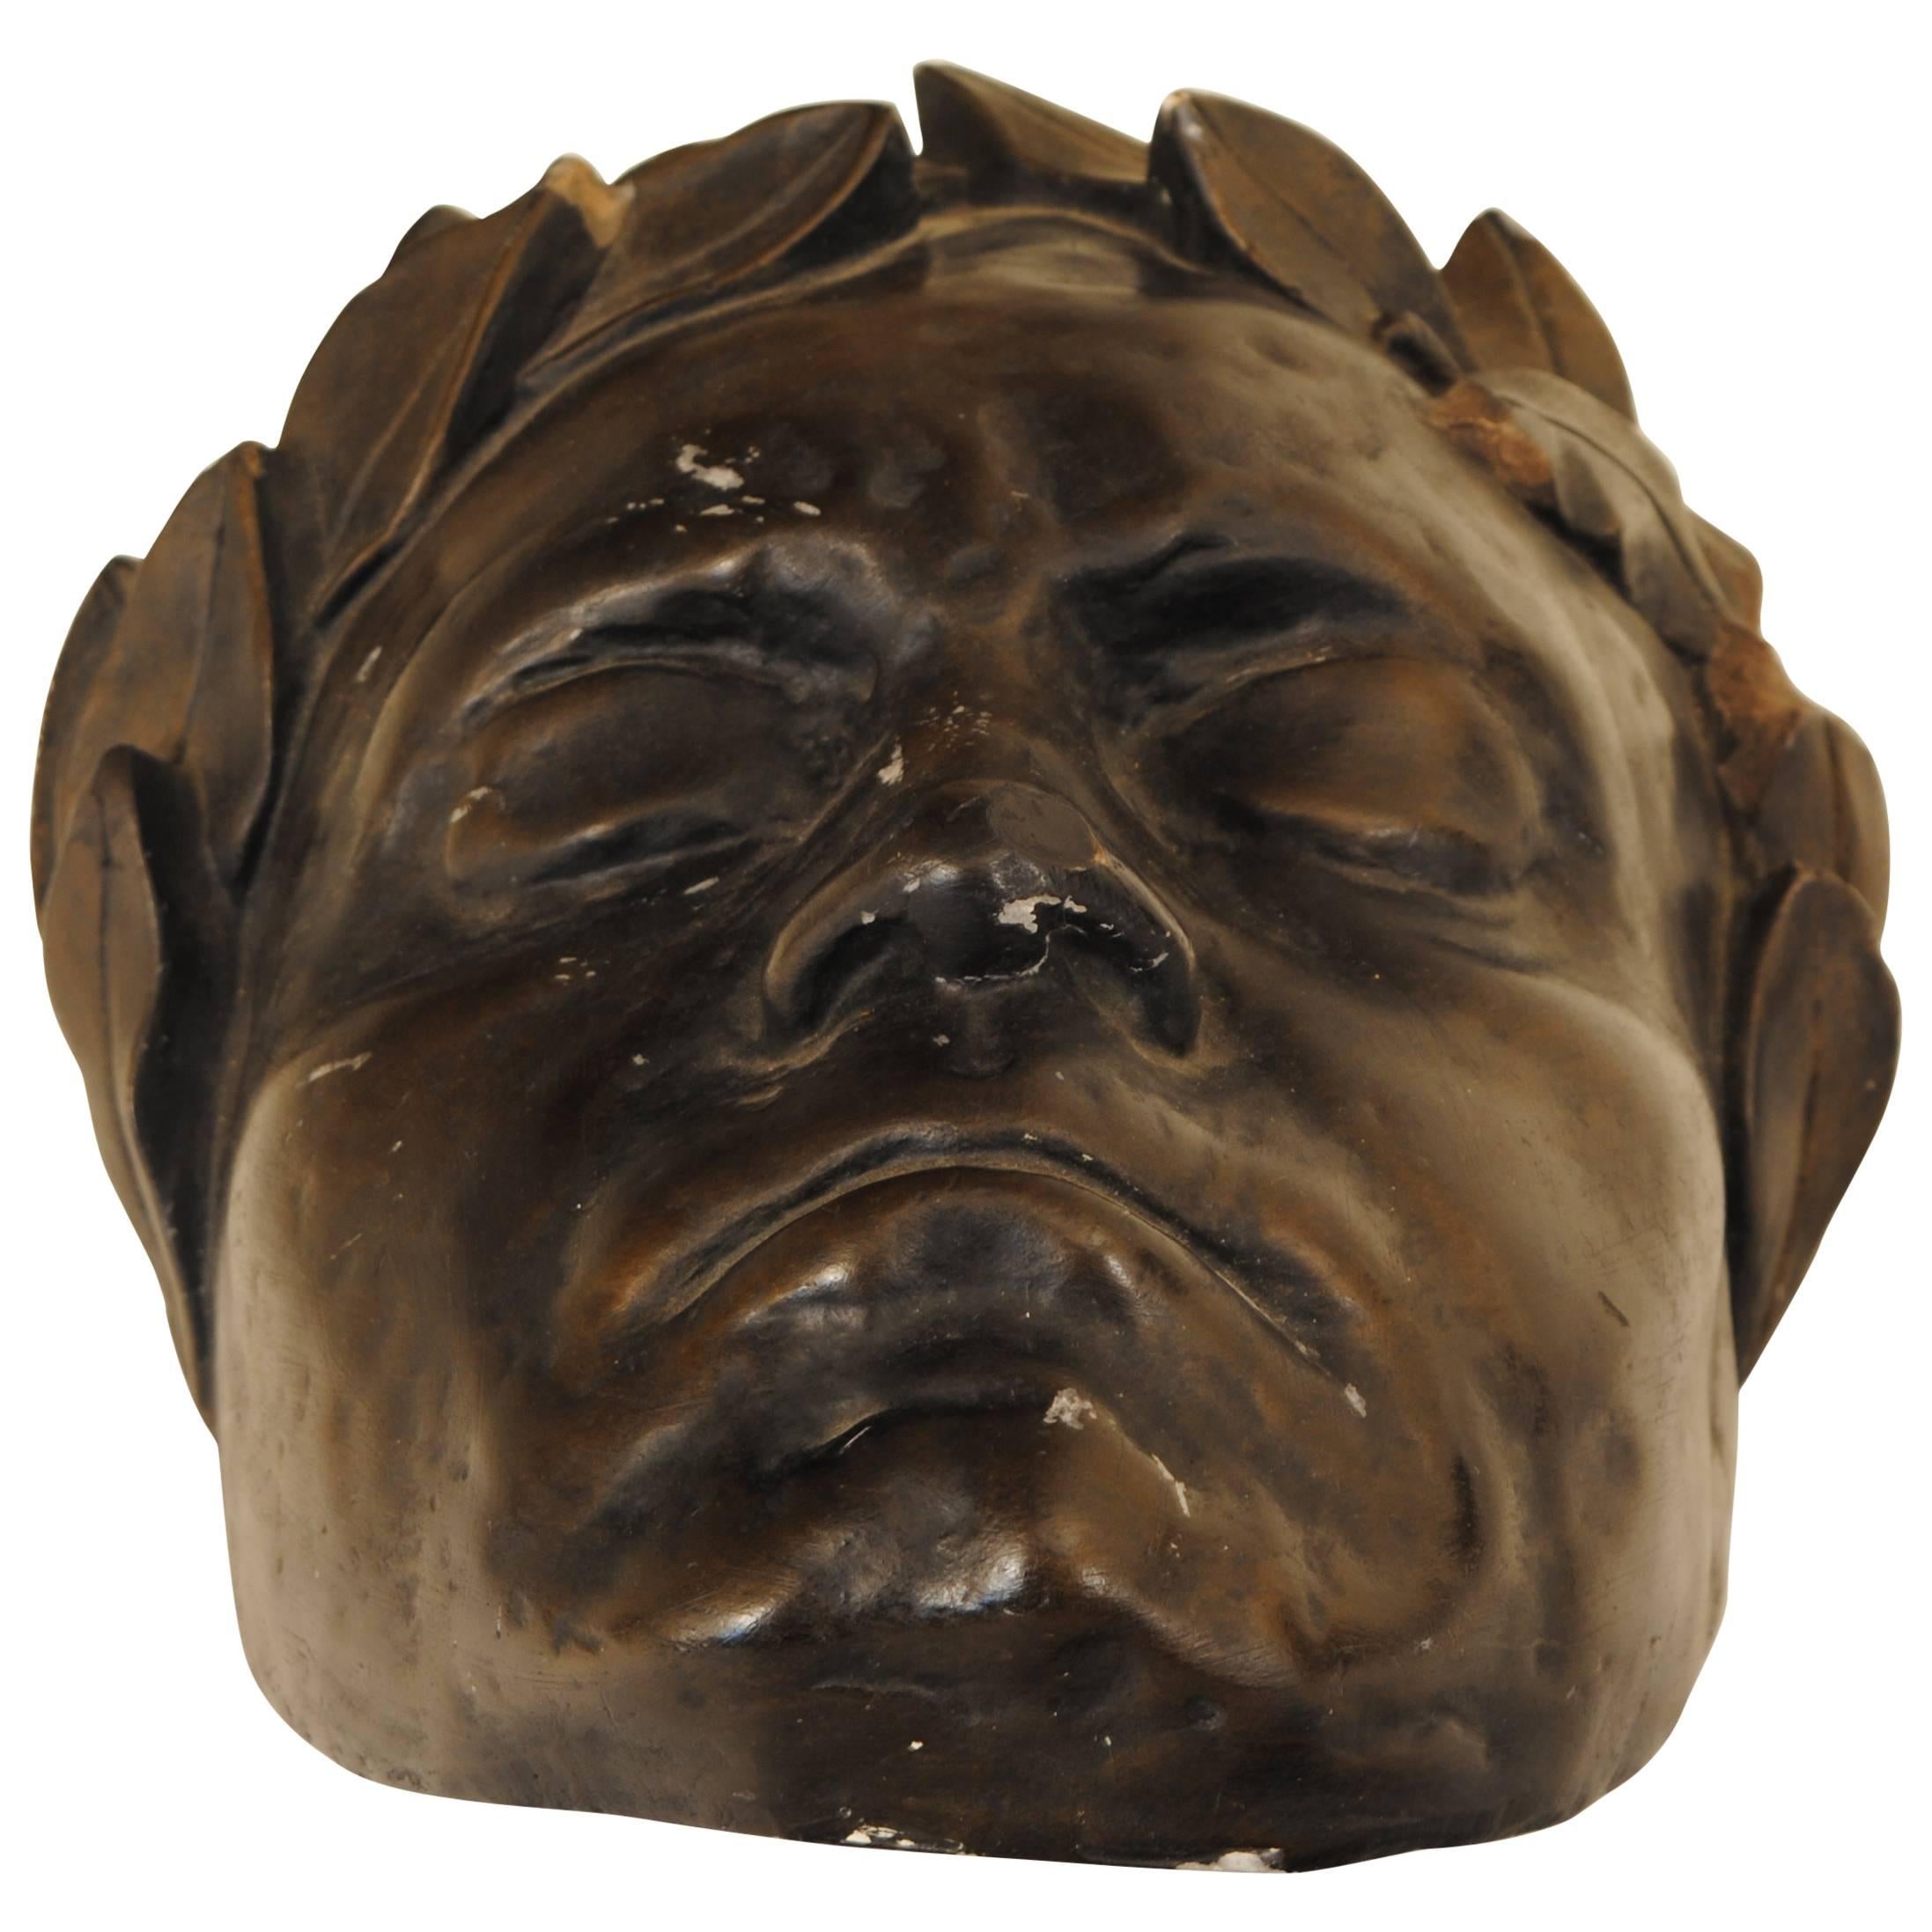 Painted Plaster Death Mask of Beethoven, 19th-20th Century